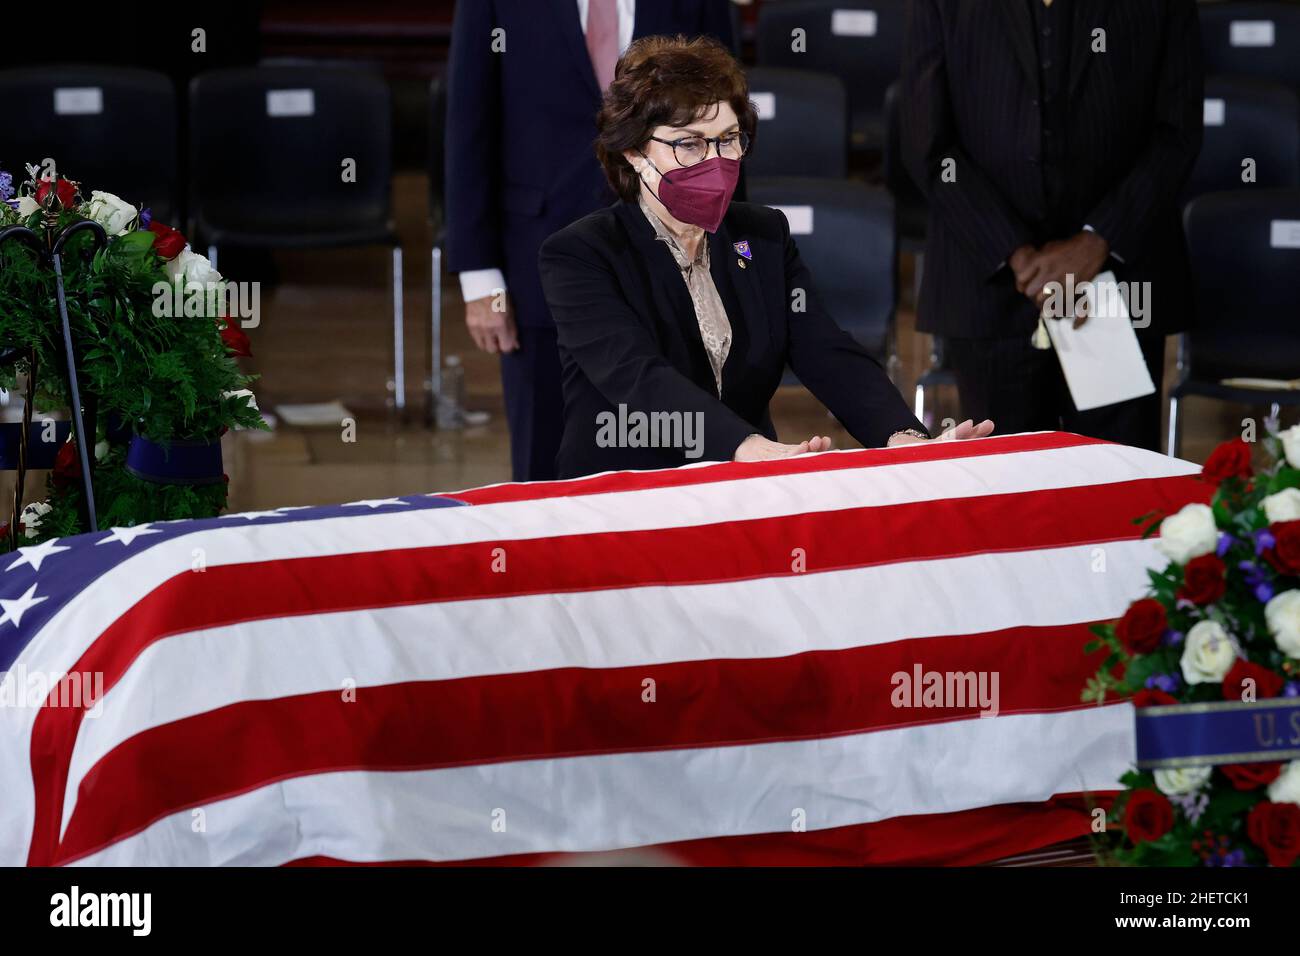 Washington, DC. 12th Jan, 2022. WASHINGTON, DC - JANUARY 12: Sen. Jacky Rosen (D-NV) places her hands on the flag-draped casket of former Senate Majority Leader Harry Reid as he lies in state in the U.S. Capitol Rotunda on January 12, 2022 in Washington, DC. A Democrat, Reid represented Nevada in Congress for more than 30 years, eight as the Senate majority leader. Credit: Chip Somodevilla/Pool via CNP/dpa/Alamy Live News Stock Photo